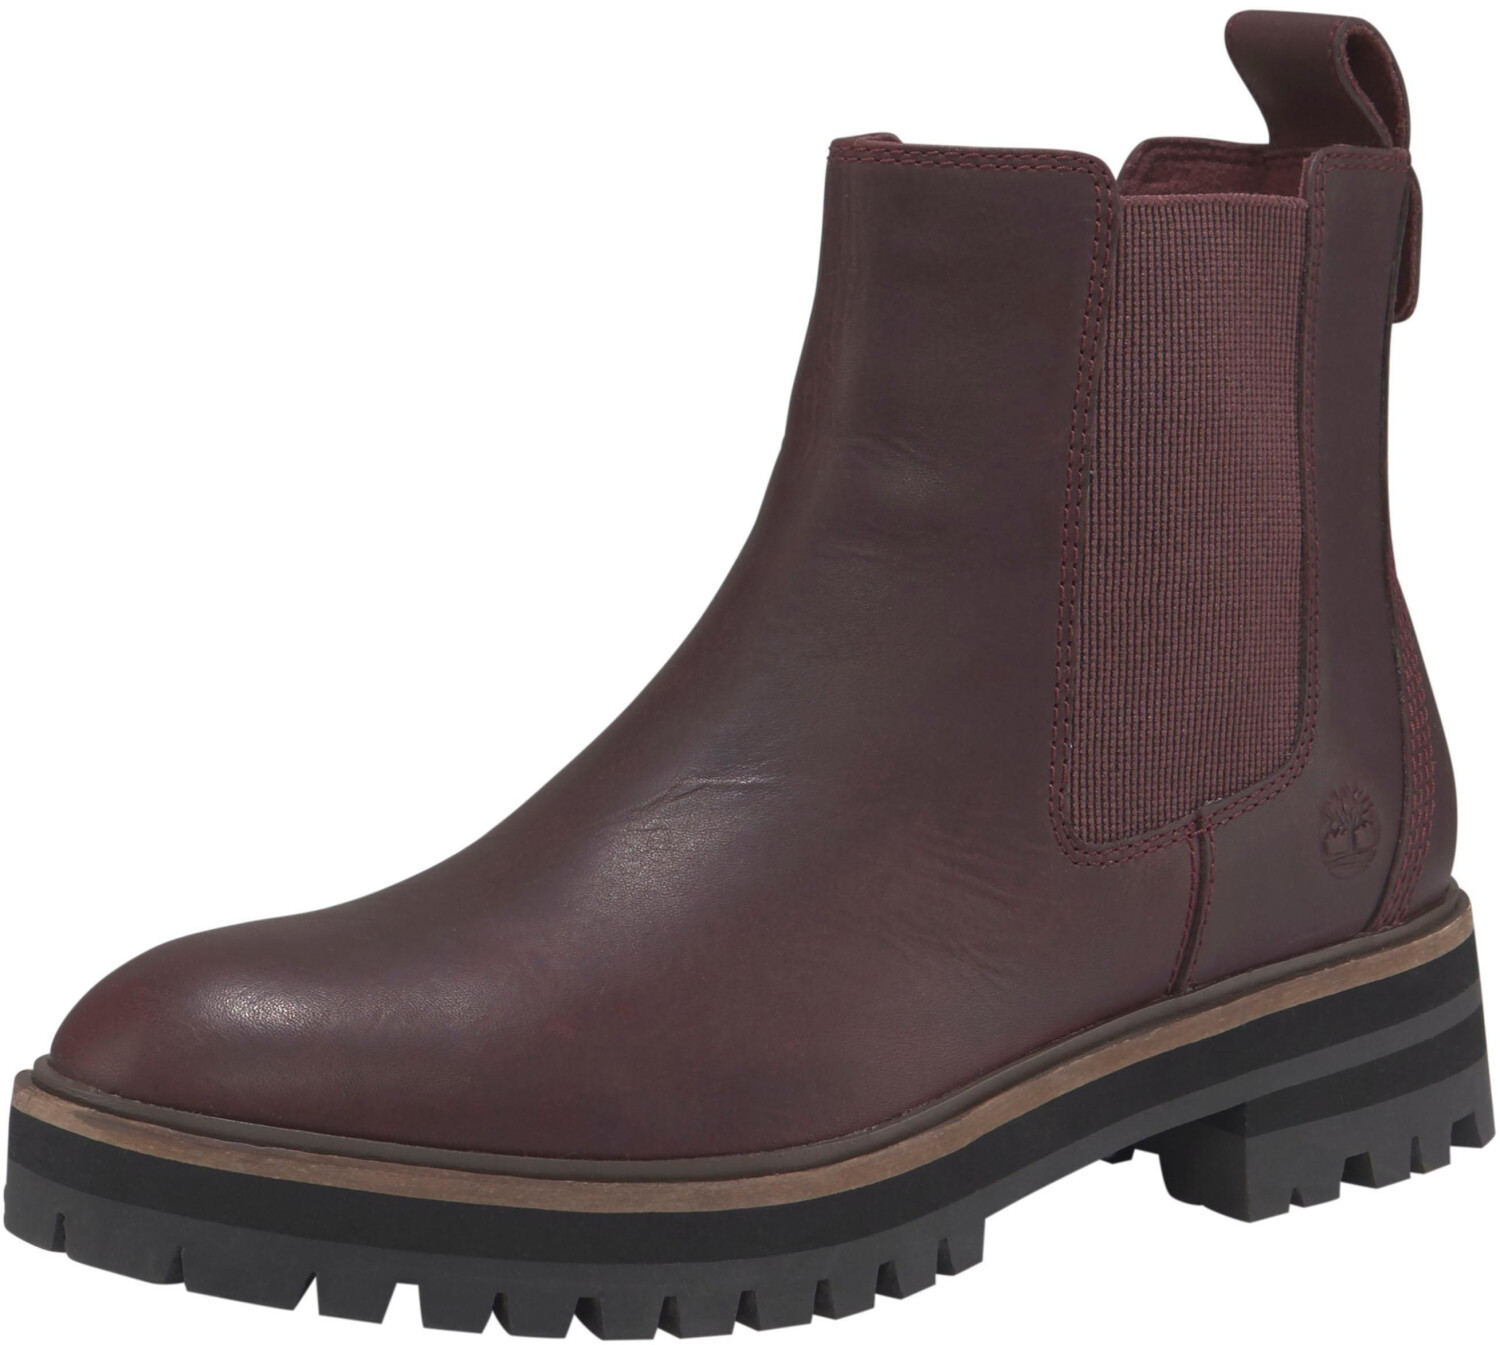 Buy Timberland London Square Chelsea Boots Women burgundy from £80.99 ...